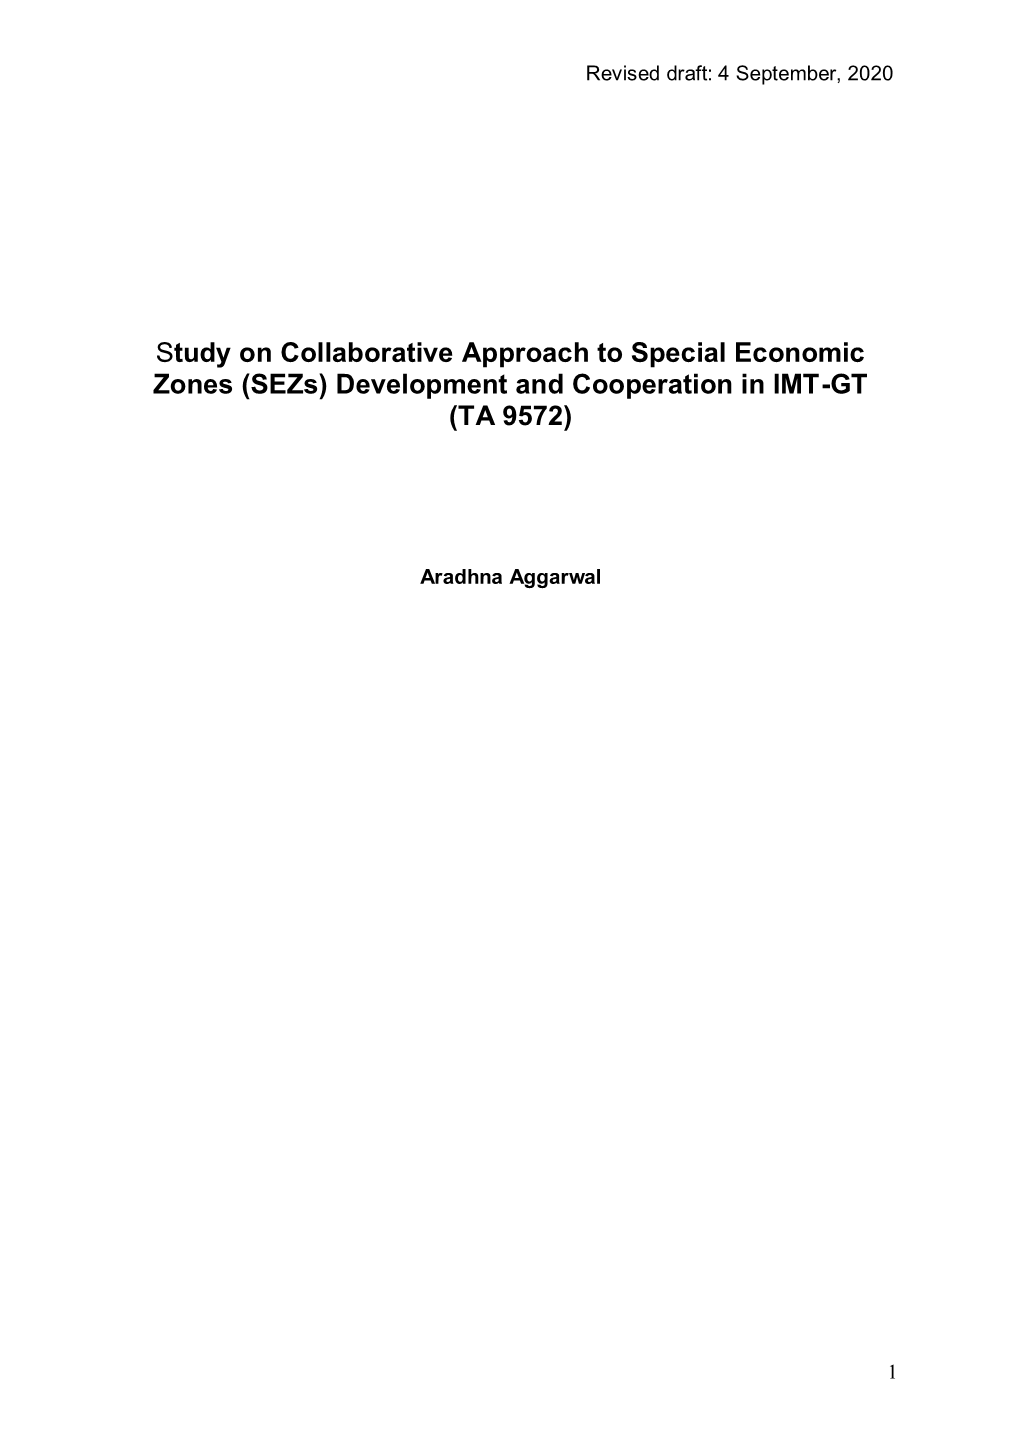 Study on Collaborative Approach to Special Economic Zones (Sezs) Development and Cooperation in IMT-GT (TA 9572)